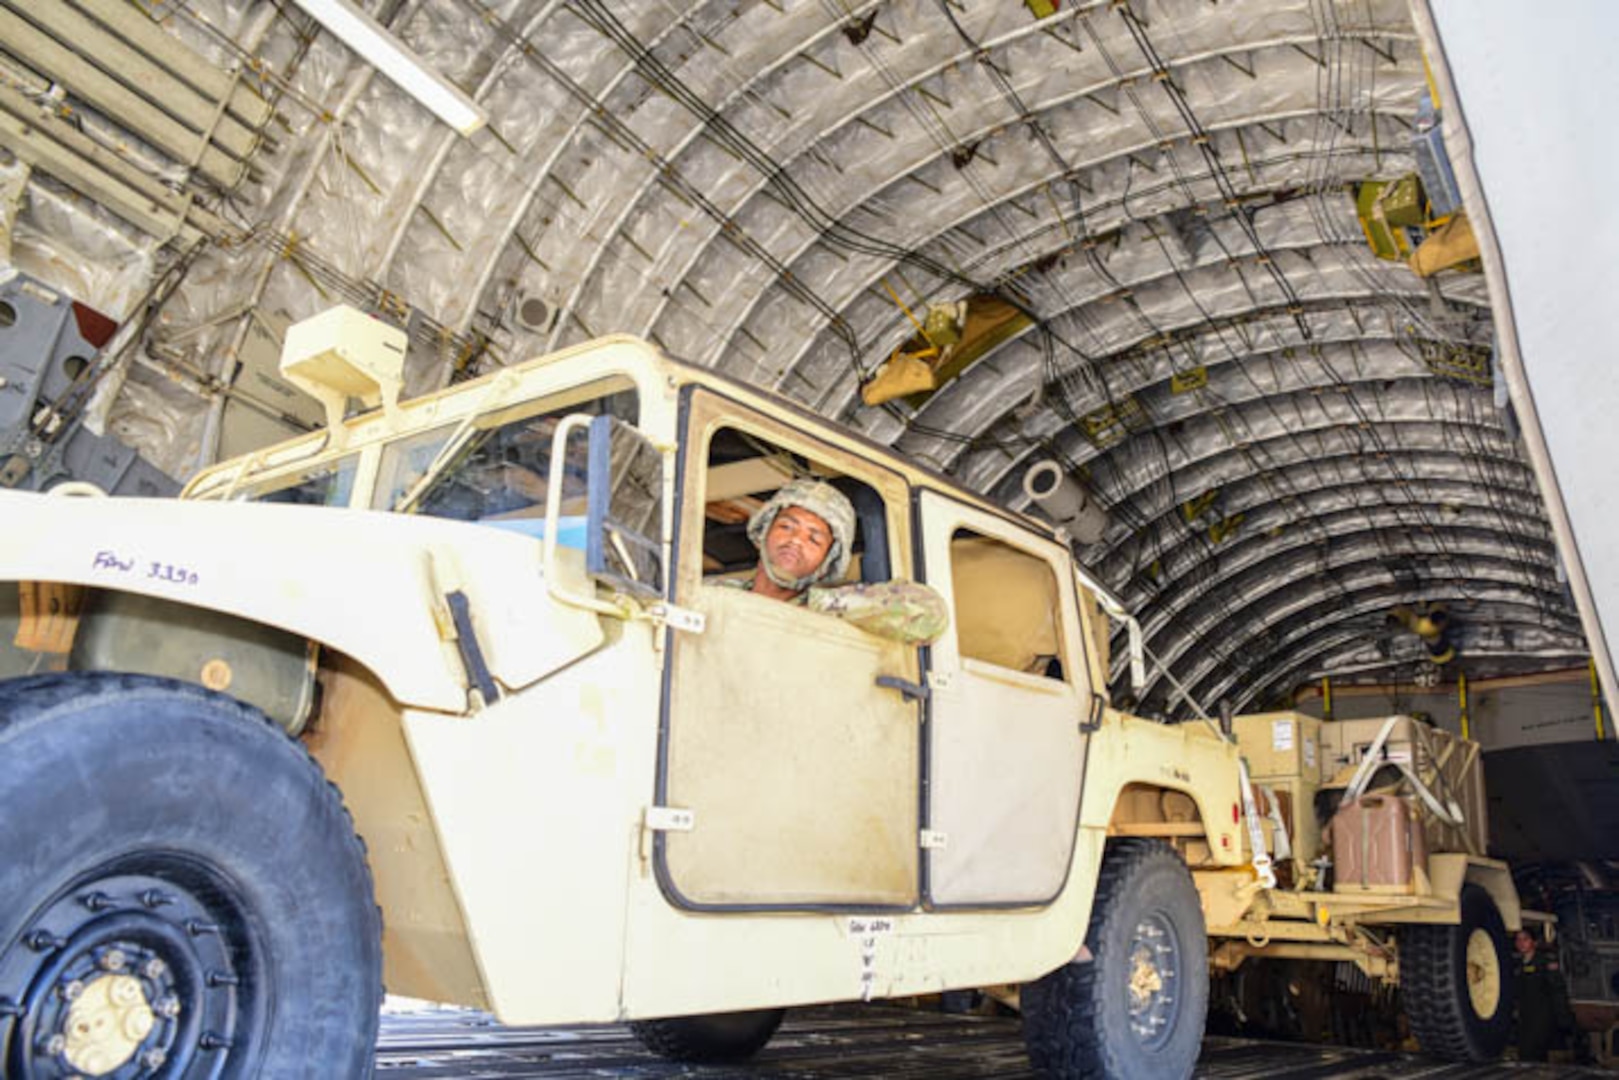 Soldiers from the 63rd Expeditionary Signal Battalion arrive with vehicles & equipment